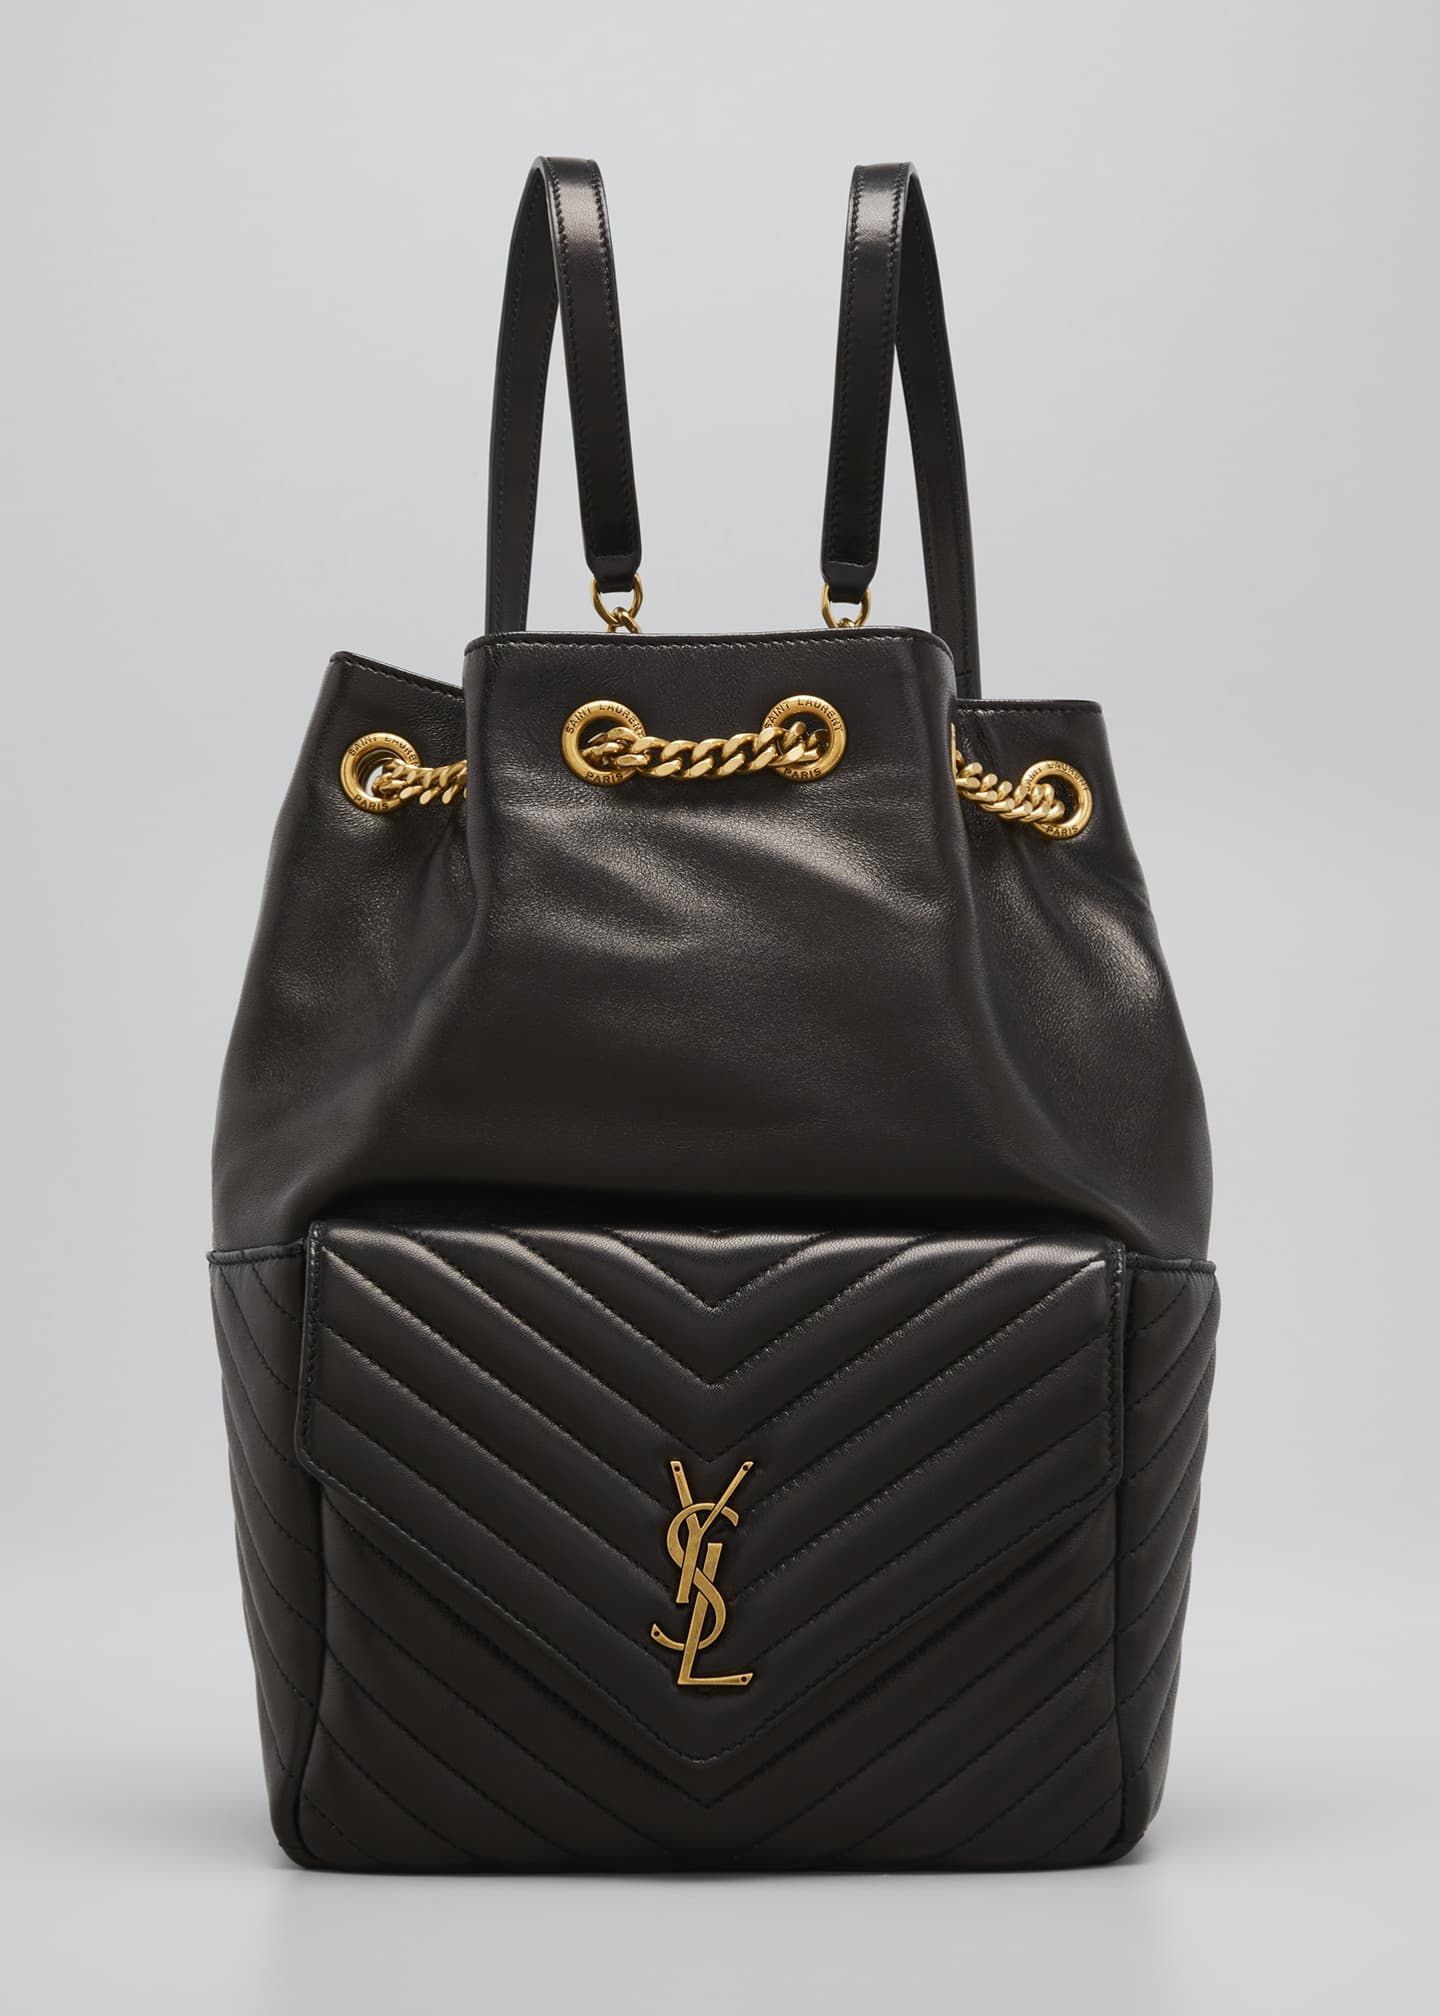 Ysl Bags: Elevate Your Style with Luxurious and Iconic YSL Bags